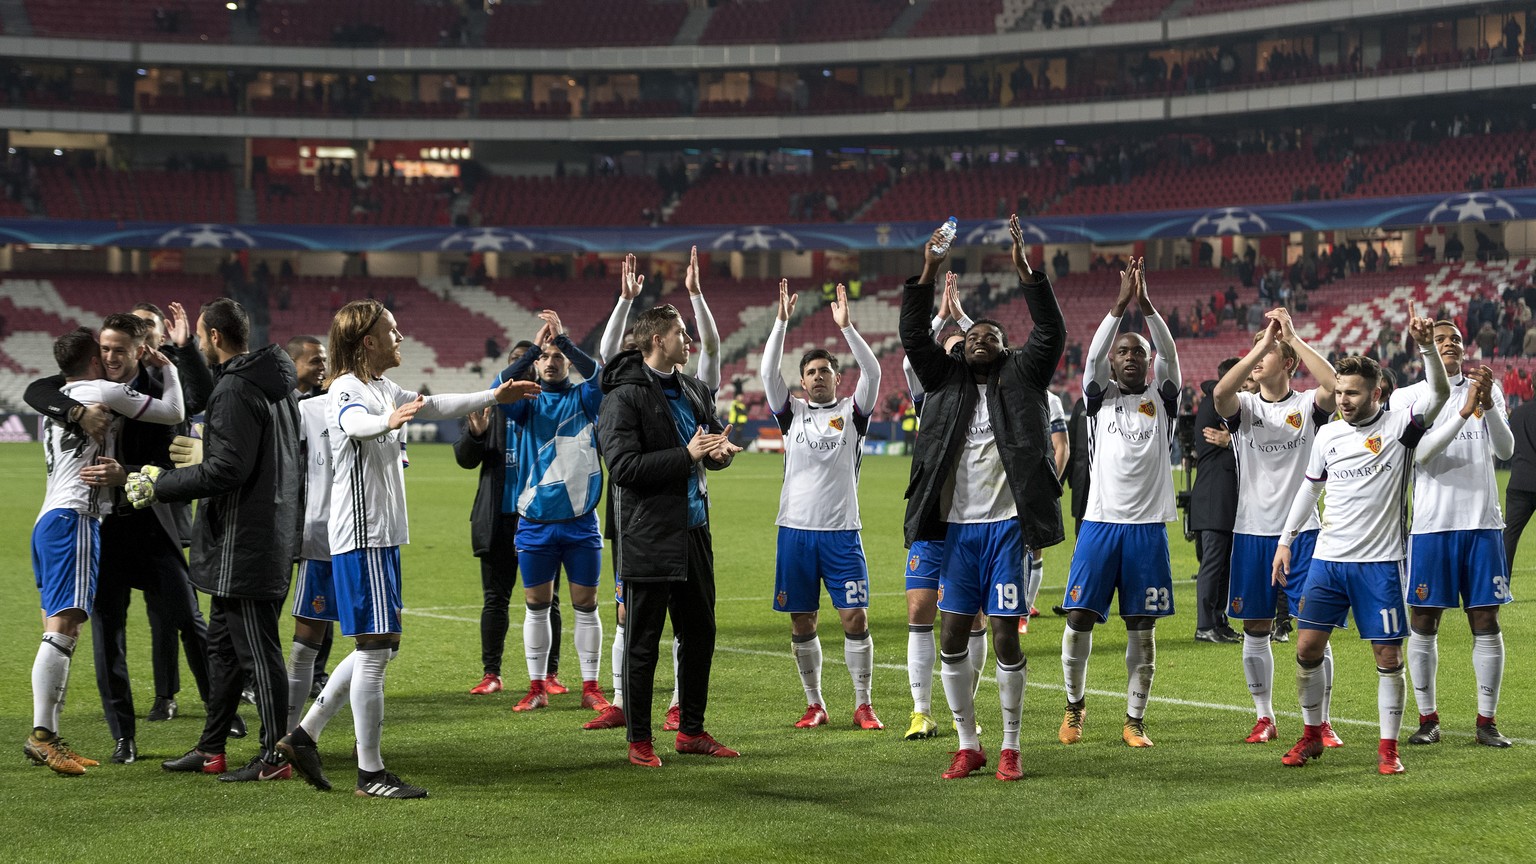 Basel&#039;s players cheer after winning the UEFA Champions League Group stage Group A matchday 6 soccer match between Portugal&#039;s SL Benfica and Switzerland&#039;s FC Basel 1893 in Benfica&#039;s ...